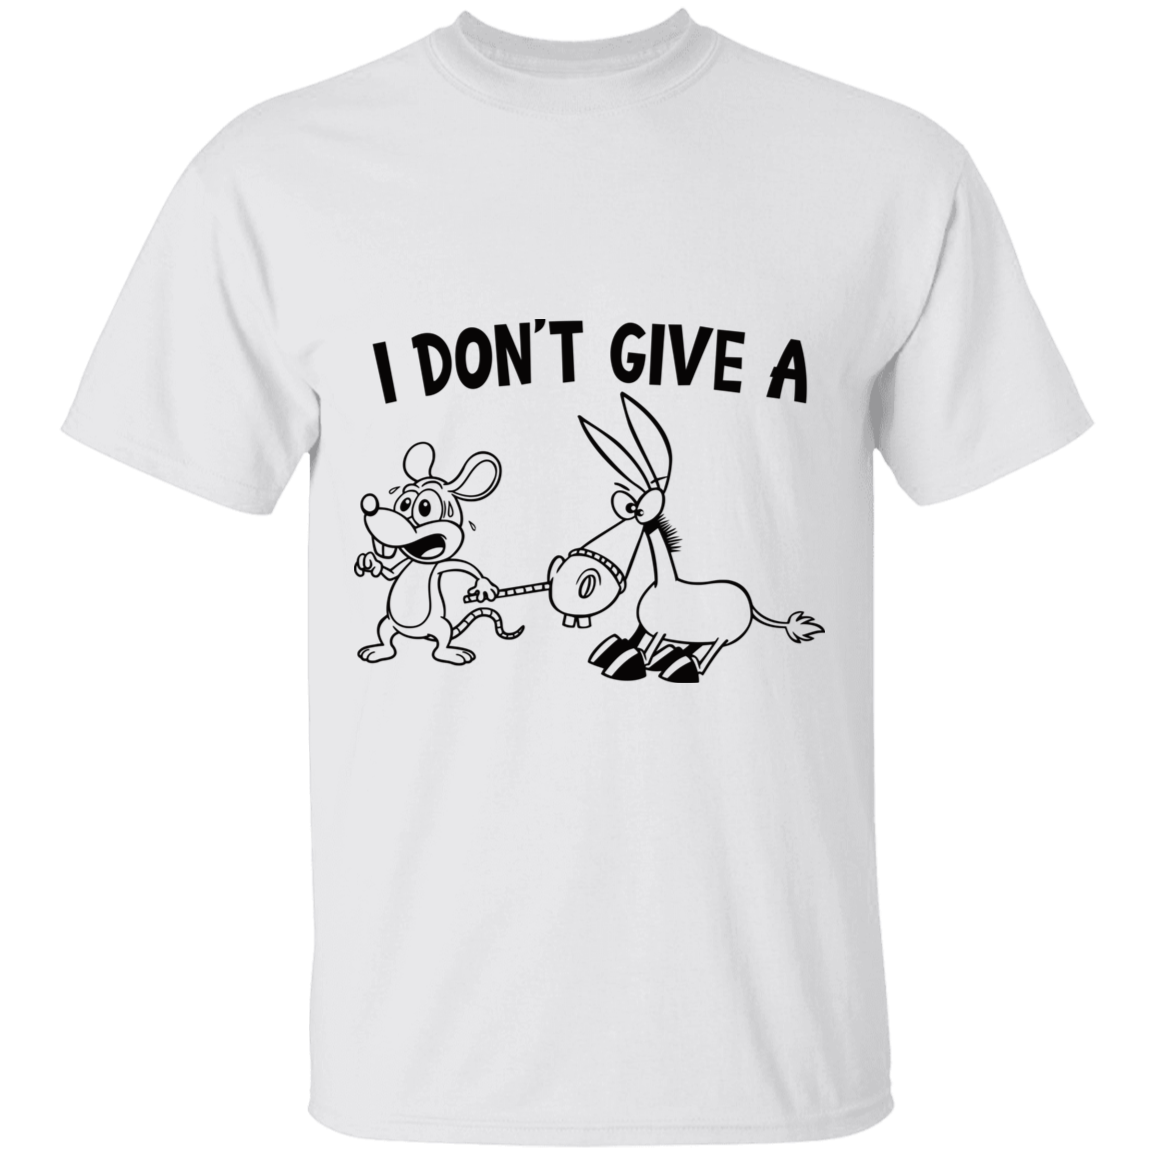 I don't give a - short sleeve t'shirt